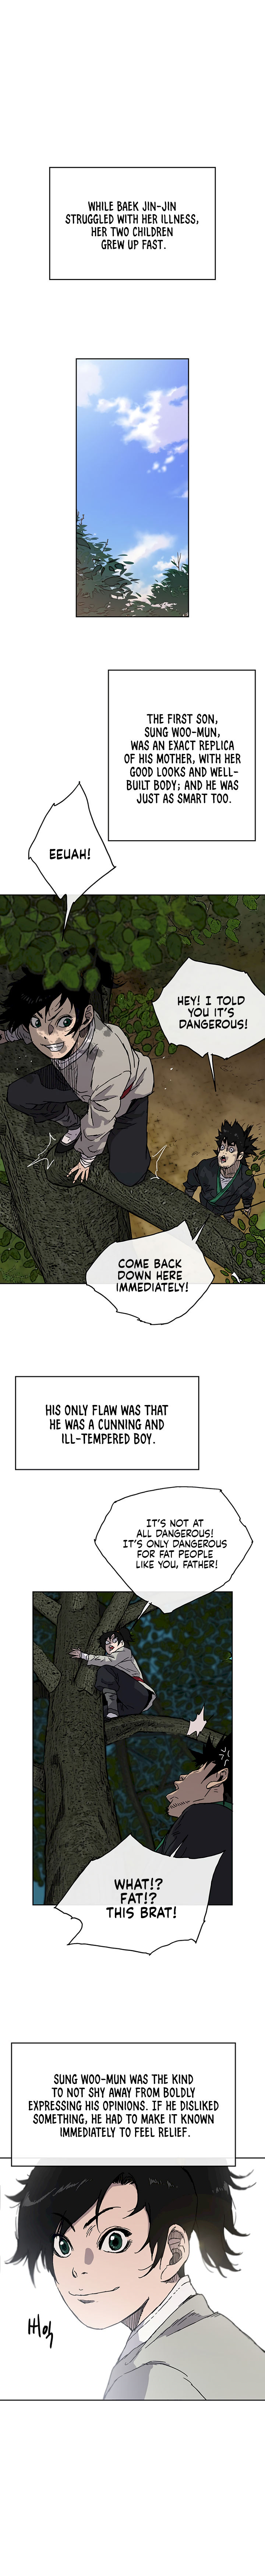 The Undefeatable Swordsman - Chapter 1 Page 15